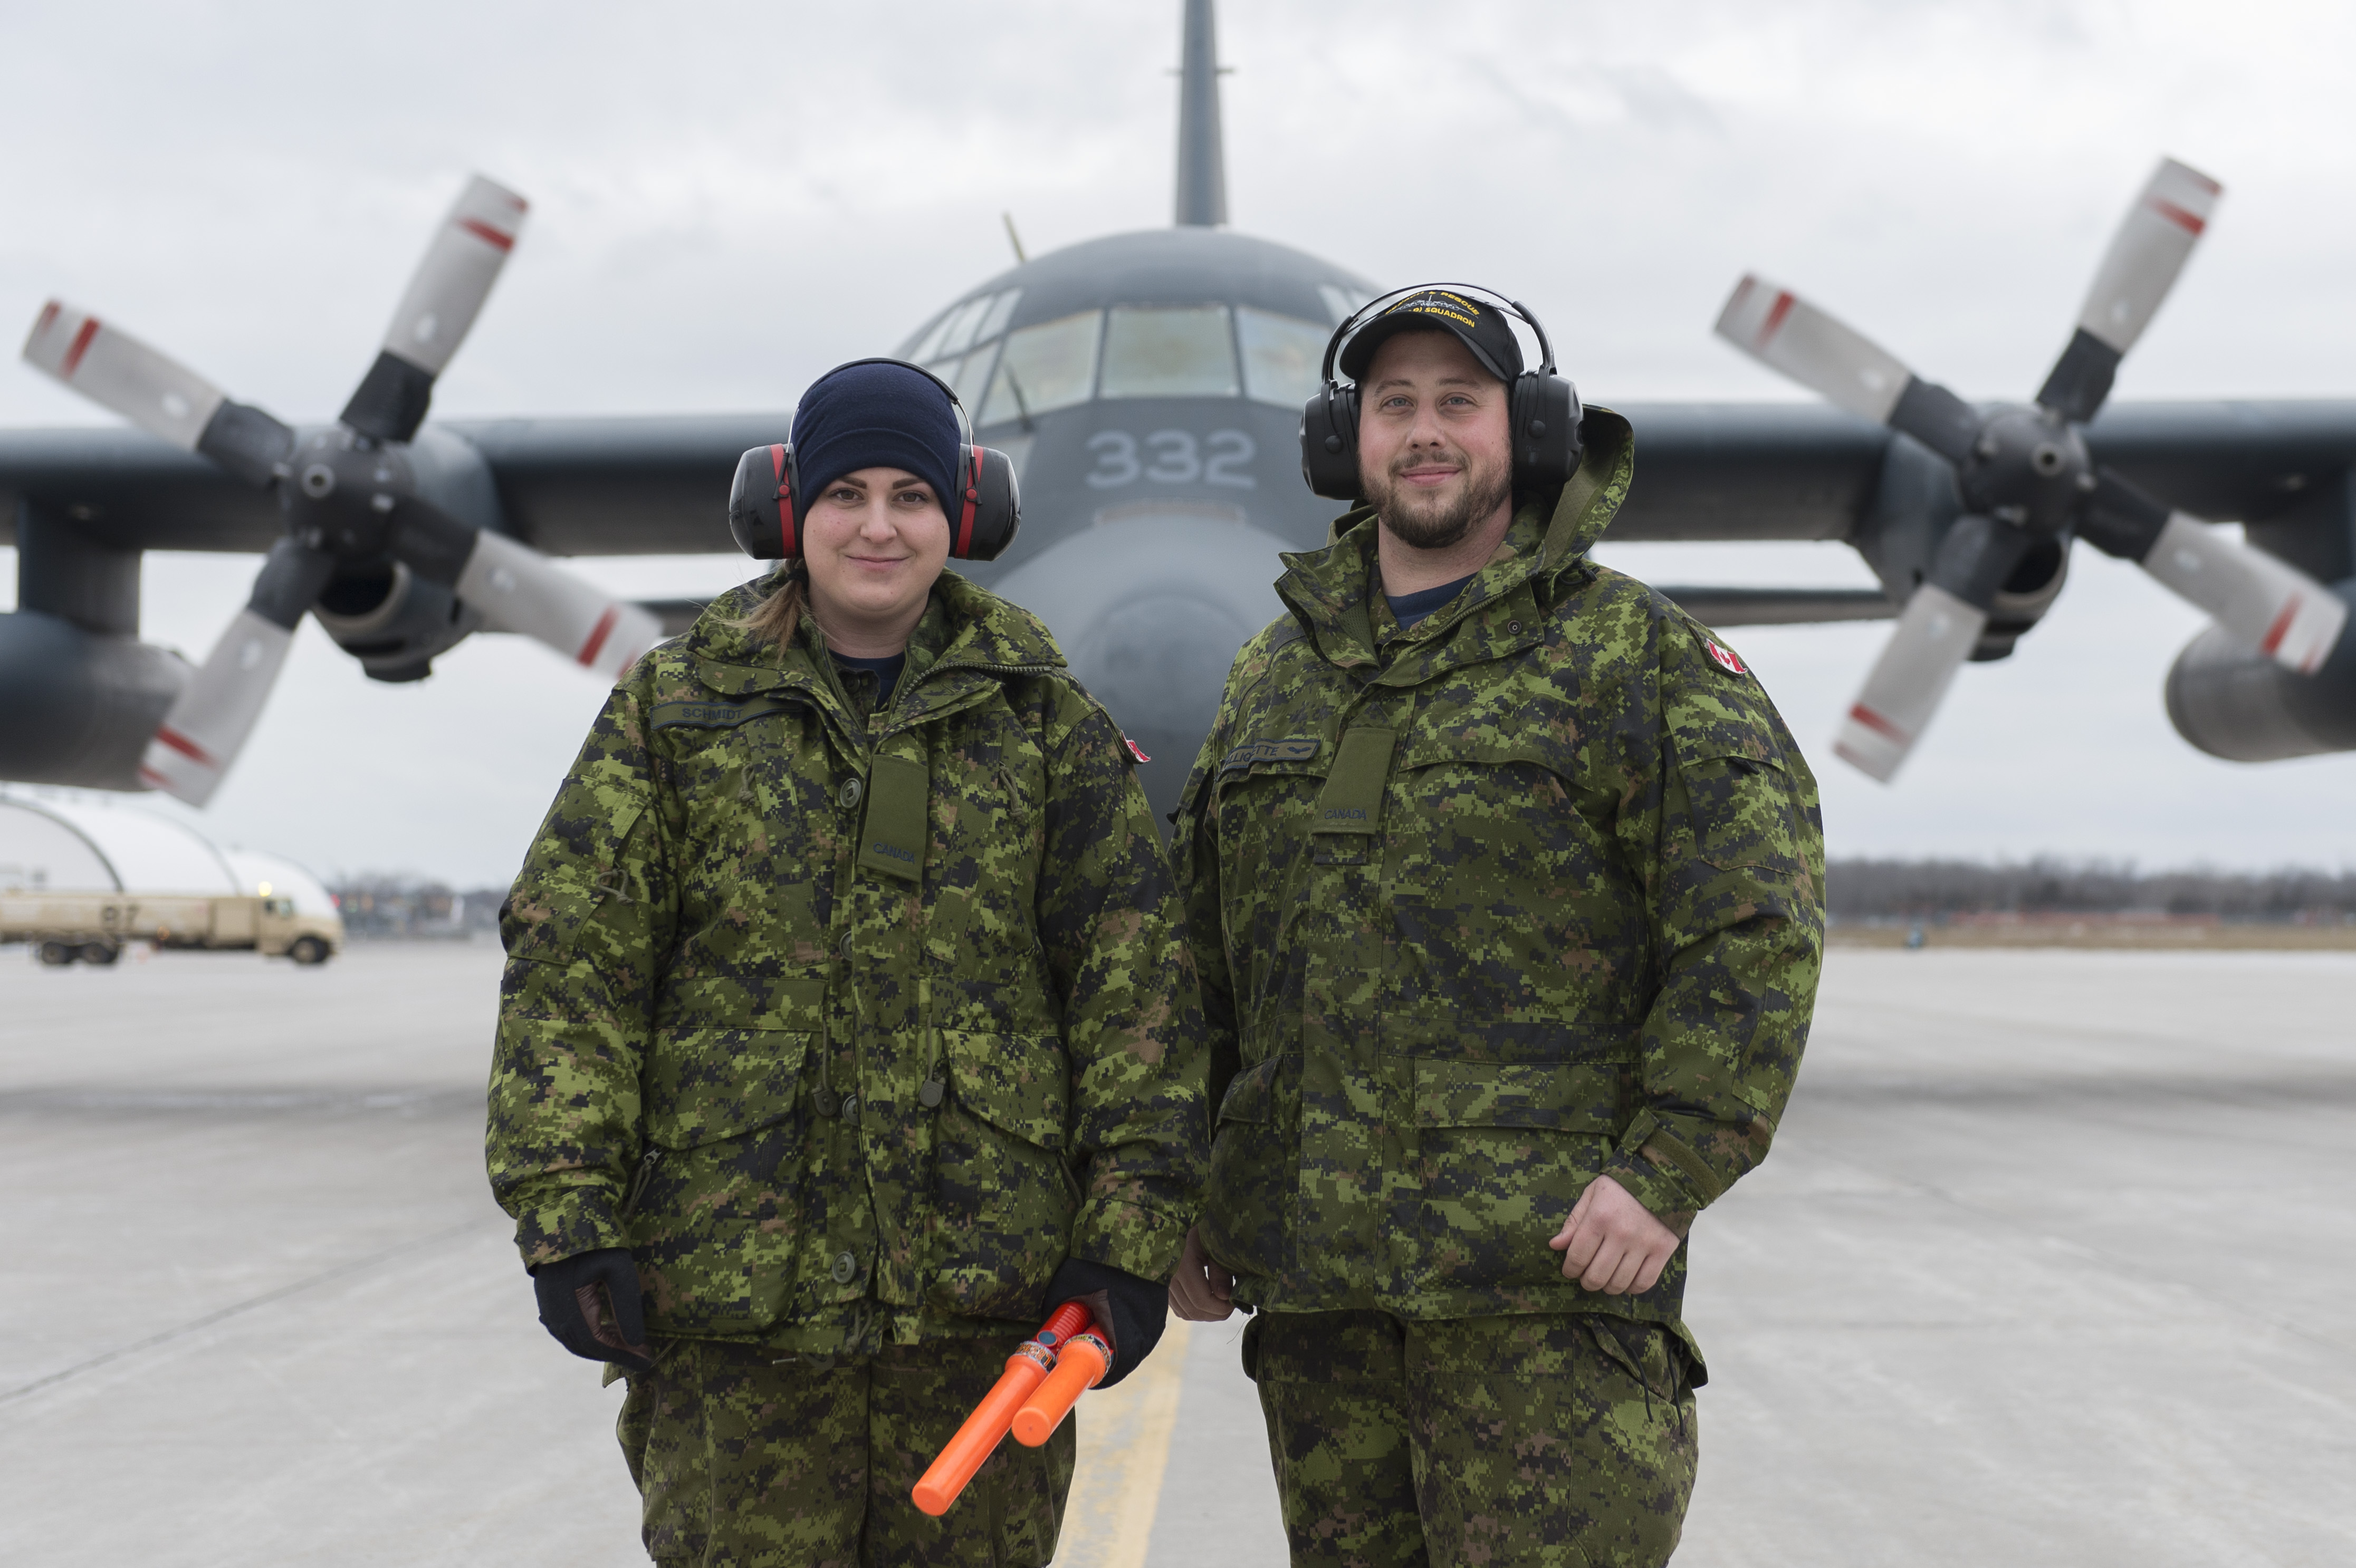 Two Air Operations Support Technicians Aviators